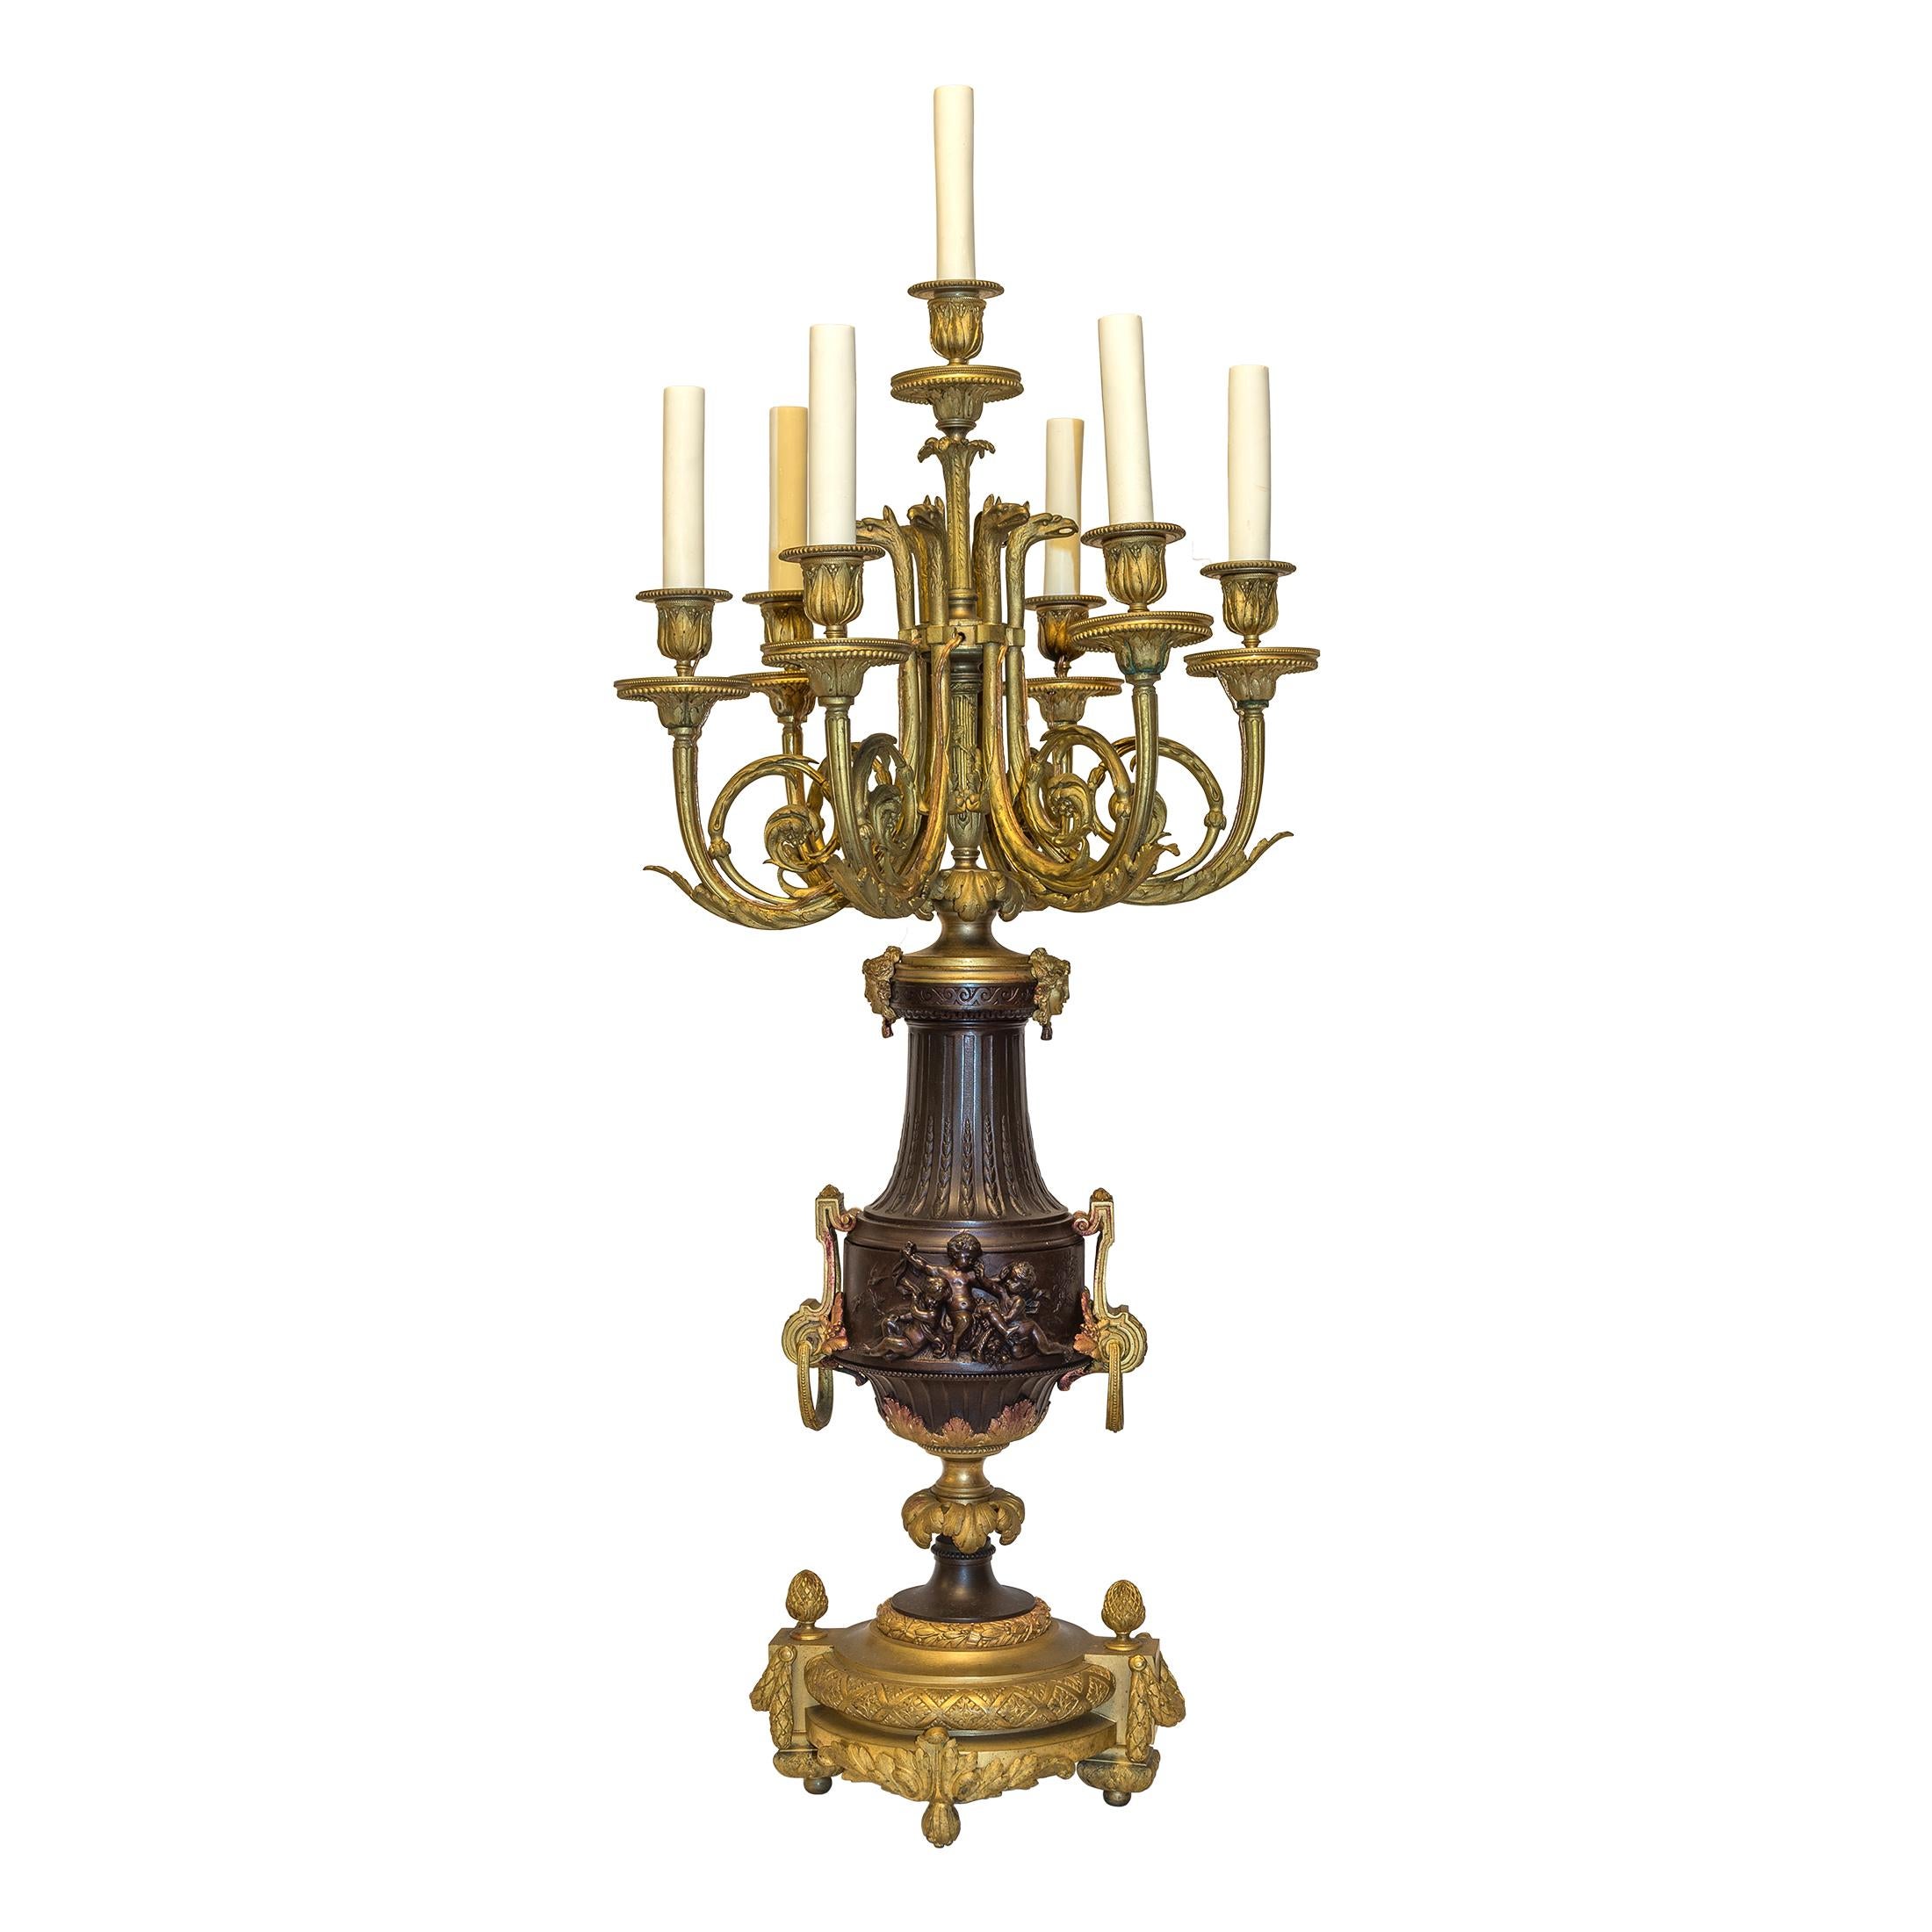 A fine quality pair of gilt and patinated bronze seven-light figural candelabra.
Each issuing seven arms with candle sleeves. 

Origin: French
Date: 19th century
Dimension: 38 inches high.